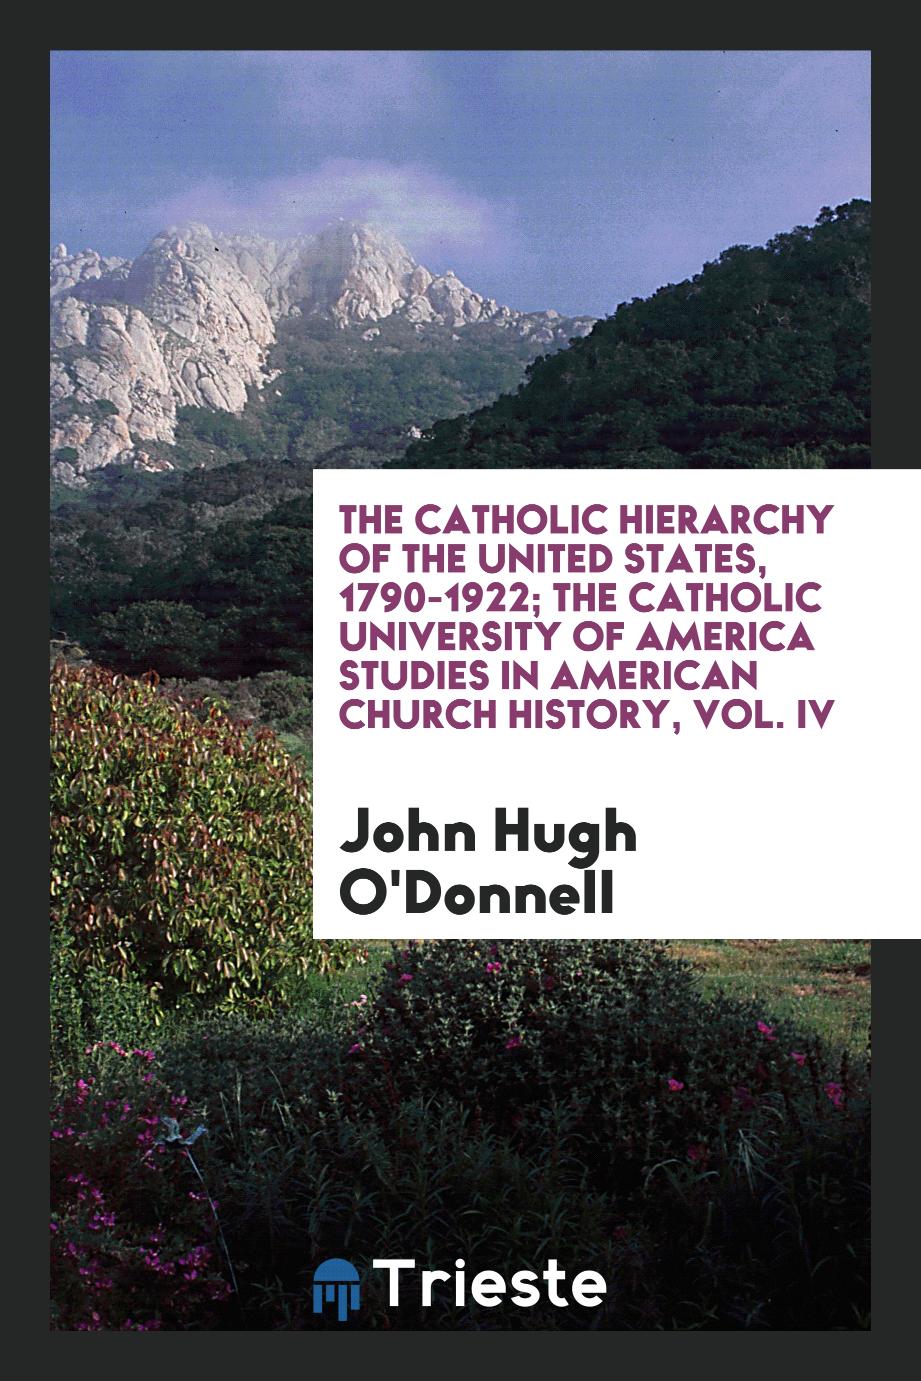 The Catholic hierarchy of the United States, 1790-1922; The Catholic University of America studies in American Church History, Vol. IV